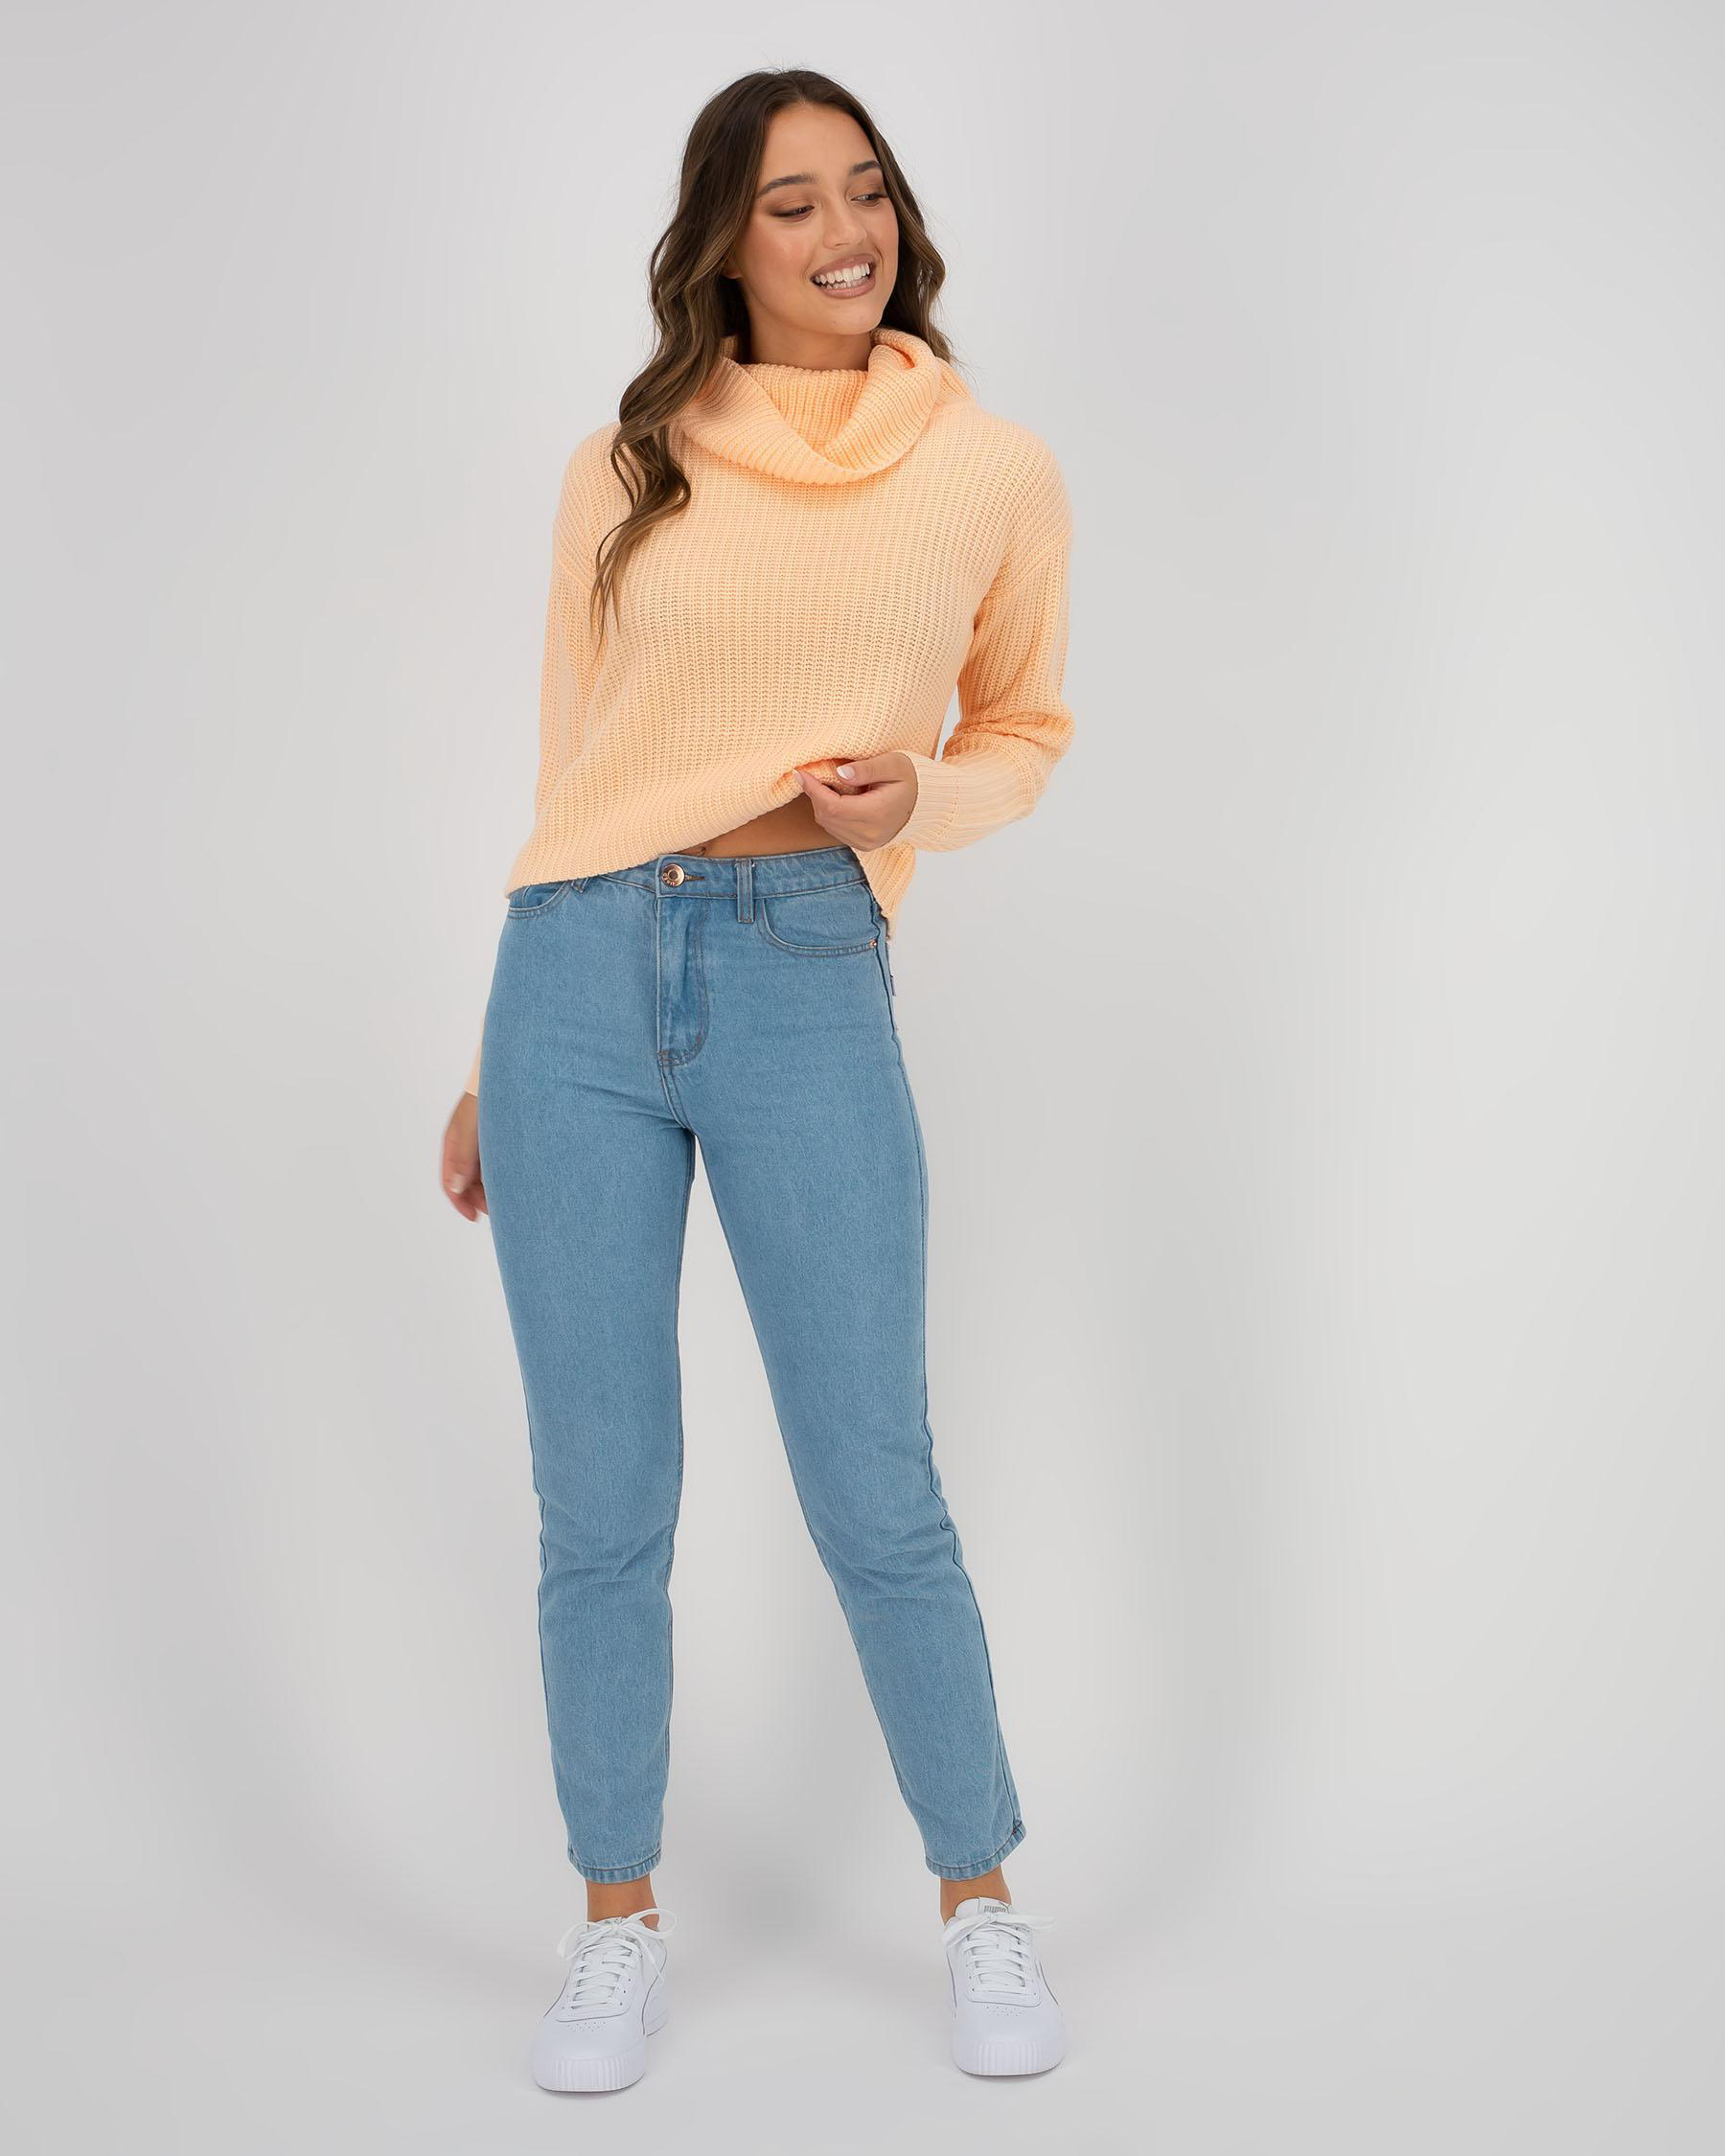 Shop Ava And Ever Jemma Tunnel Knit Jumper In Peach - Fast Shipping ...